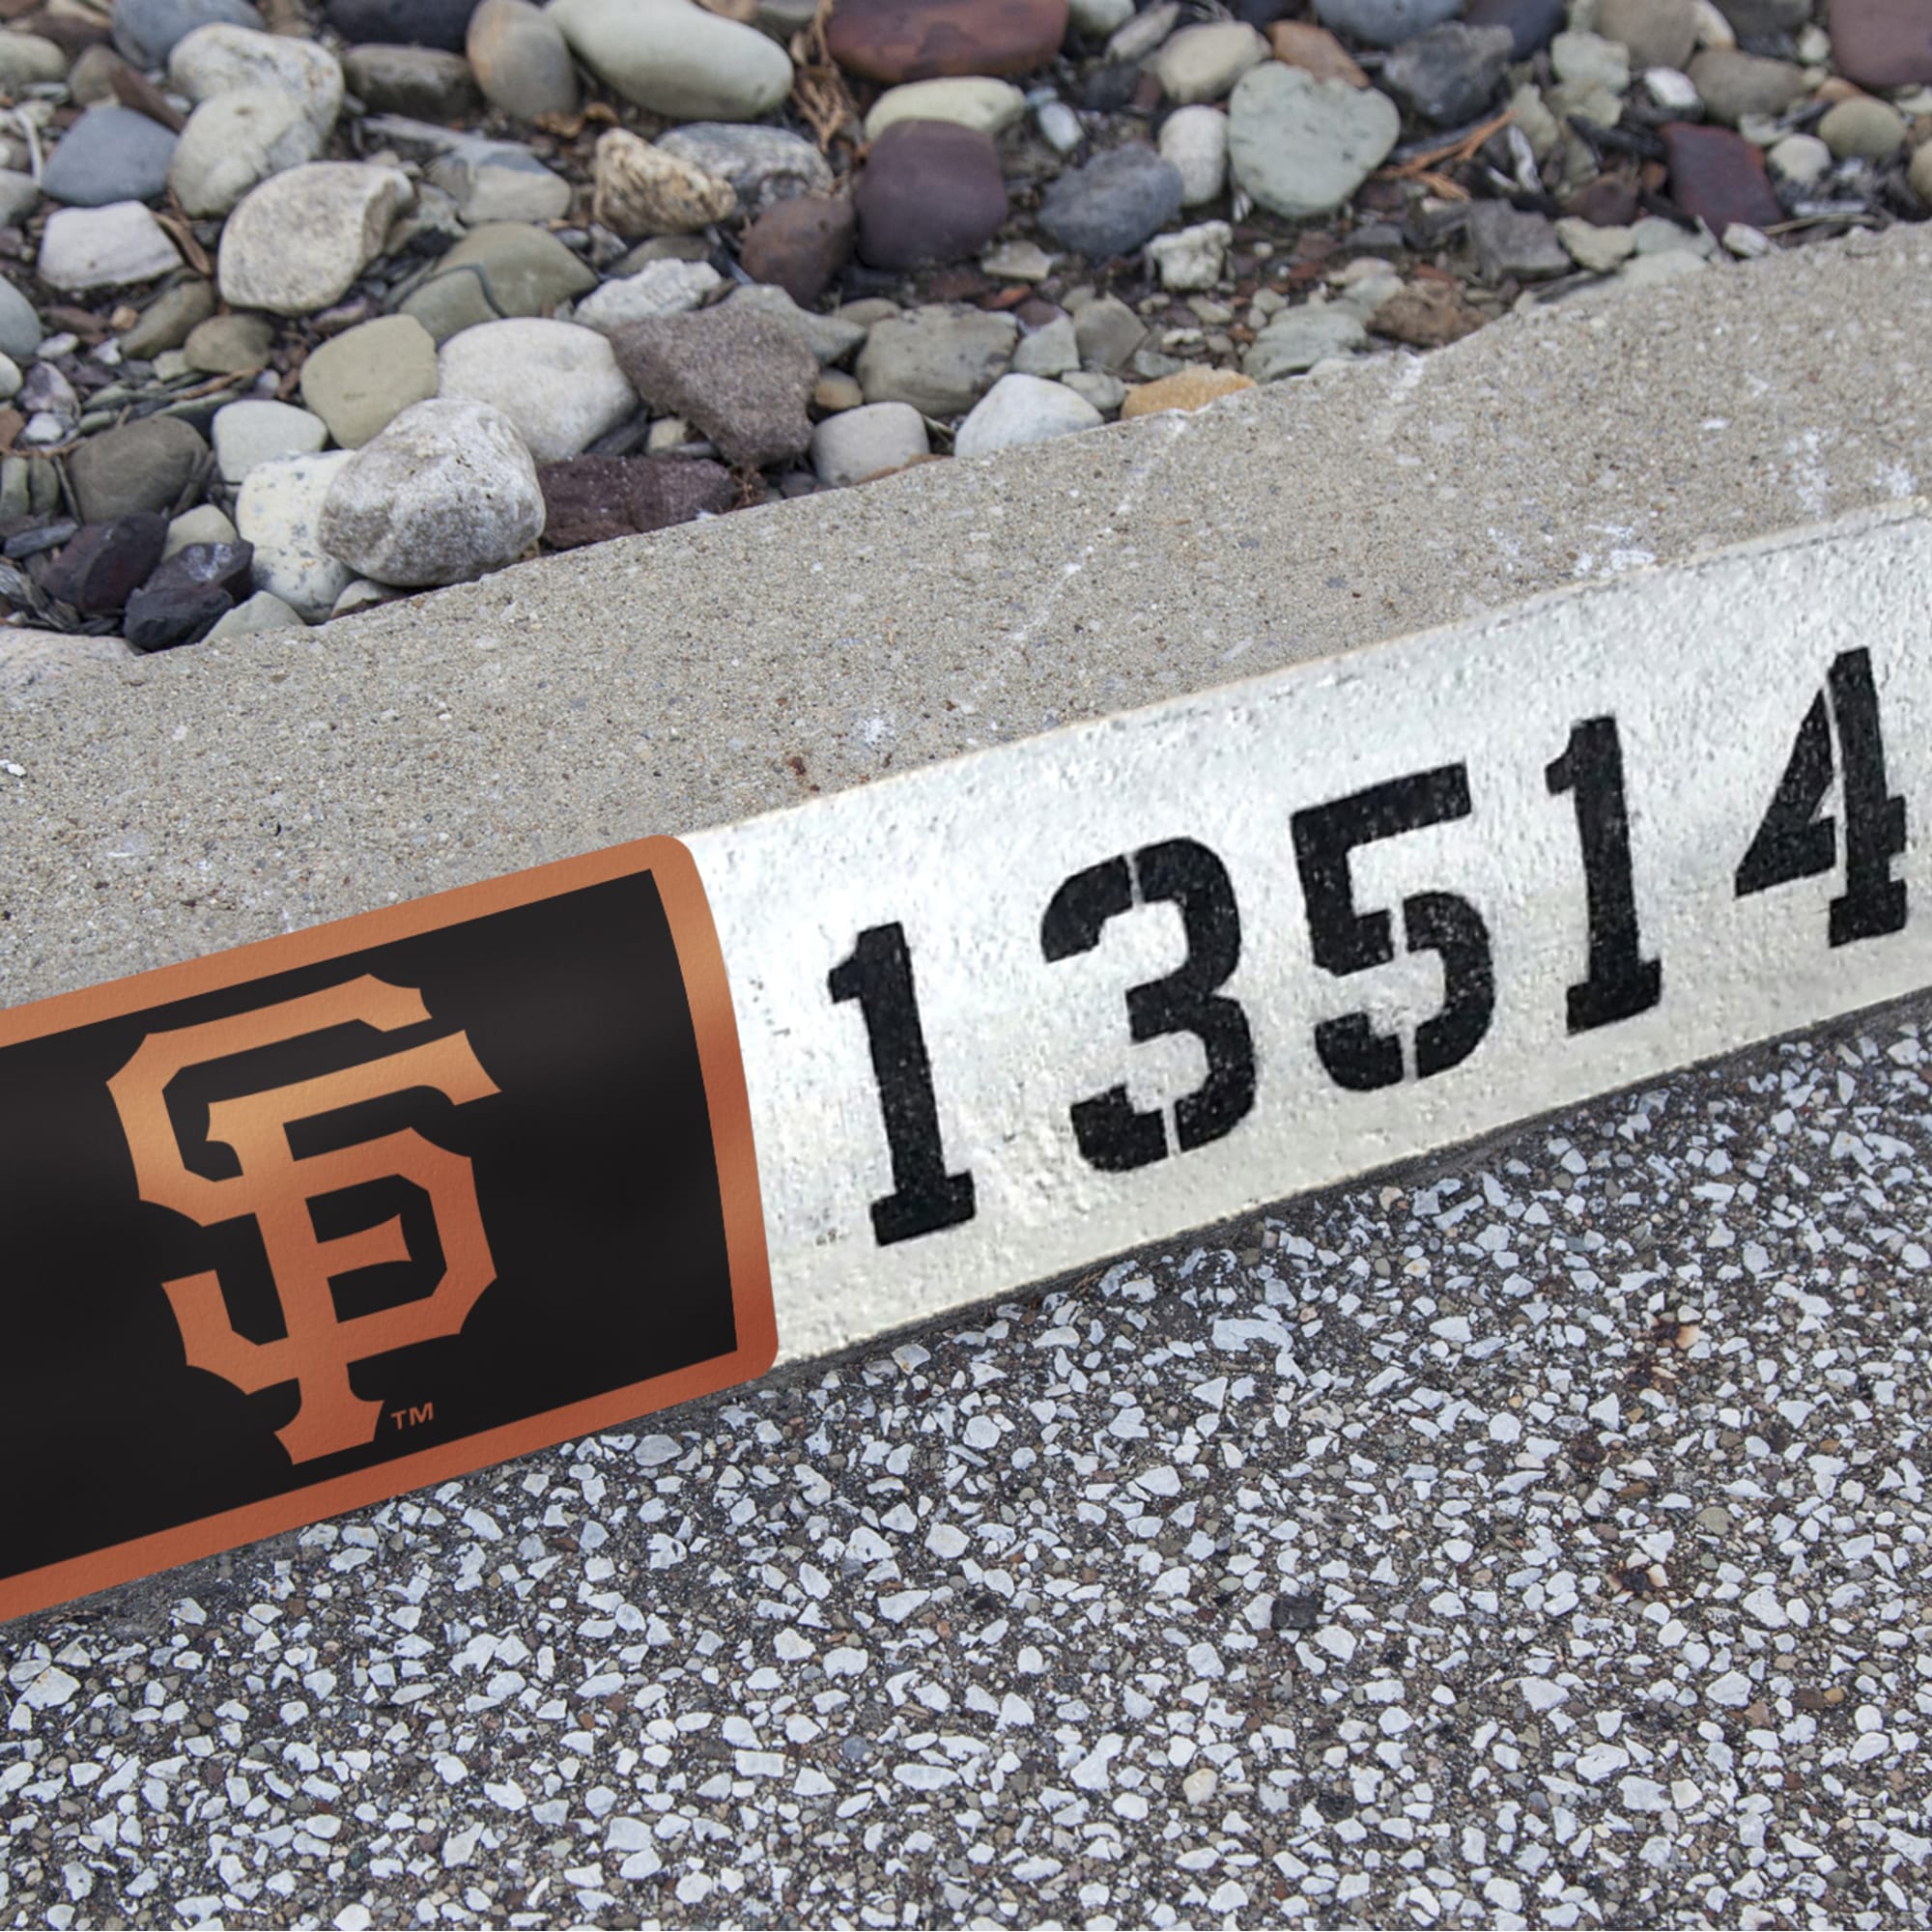 San Francisco Giants: Address Block - Officially Licensed MLB Outdoor Graphic 6.0"W x 8.0"H by Fathead | Wood/Aluminum